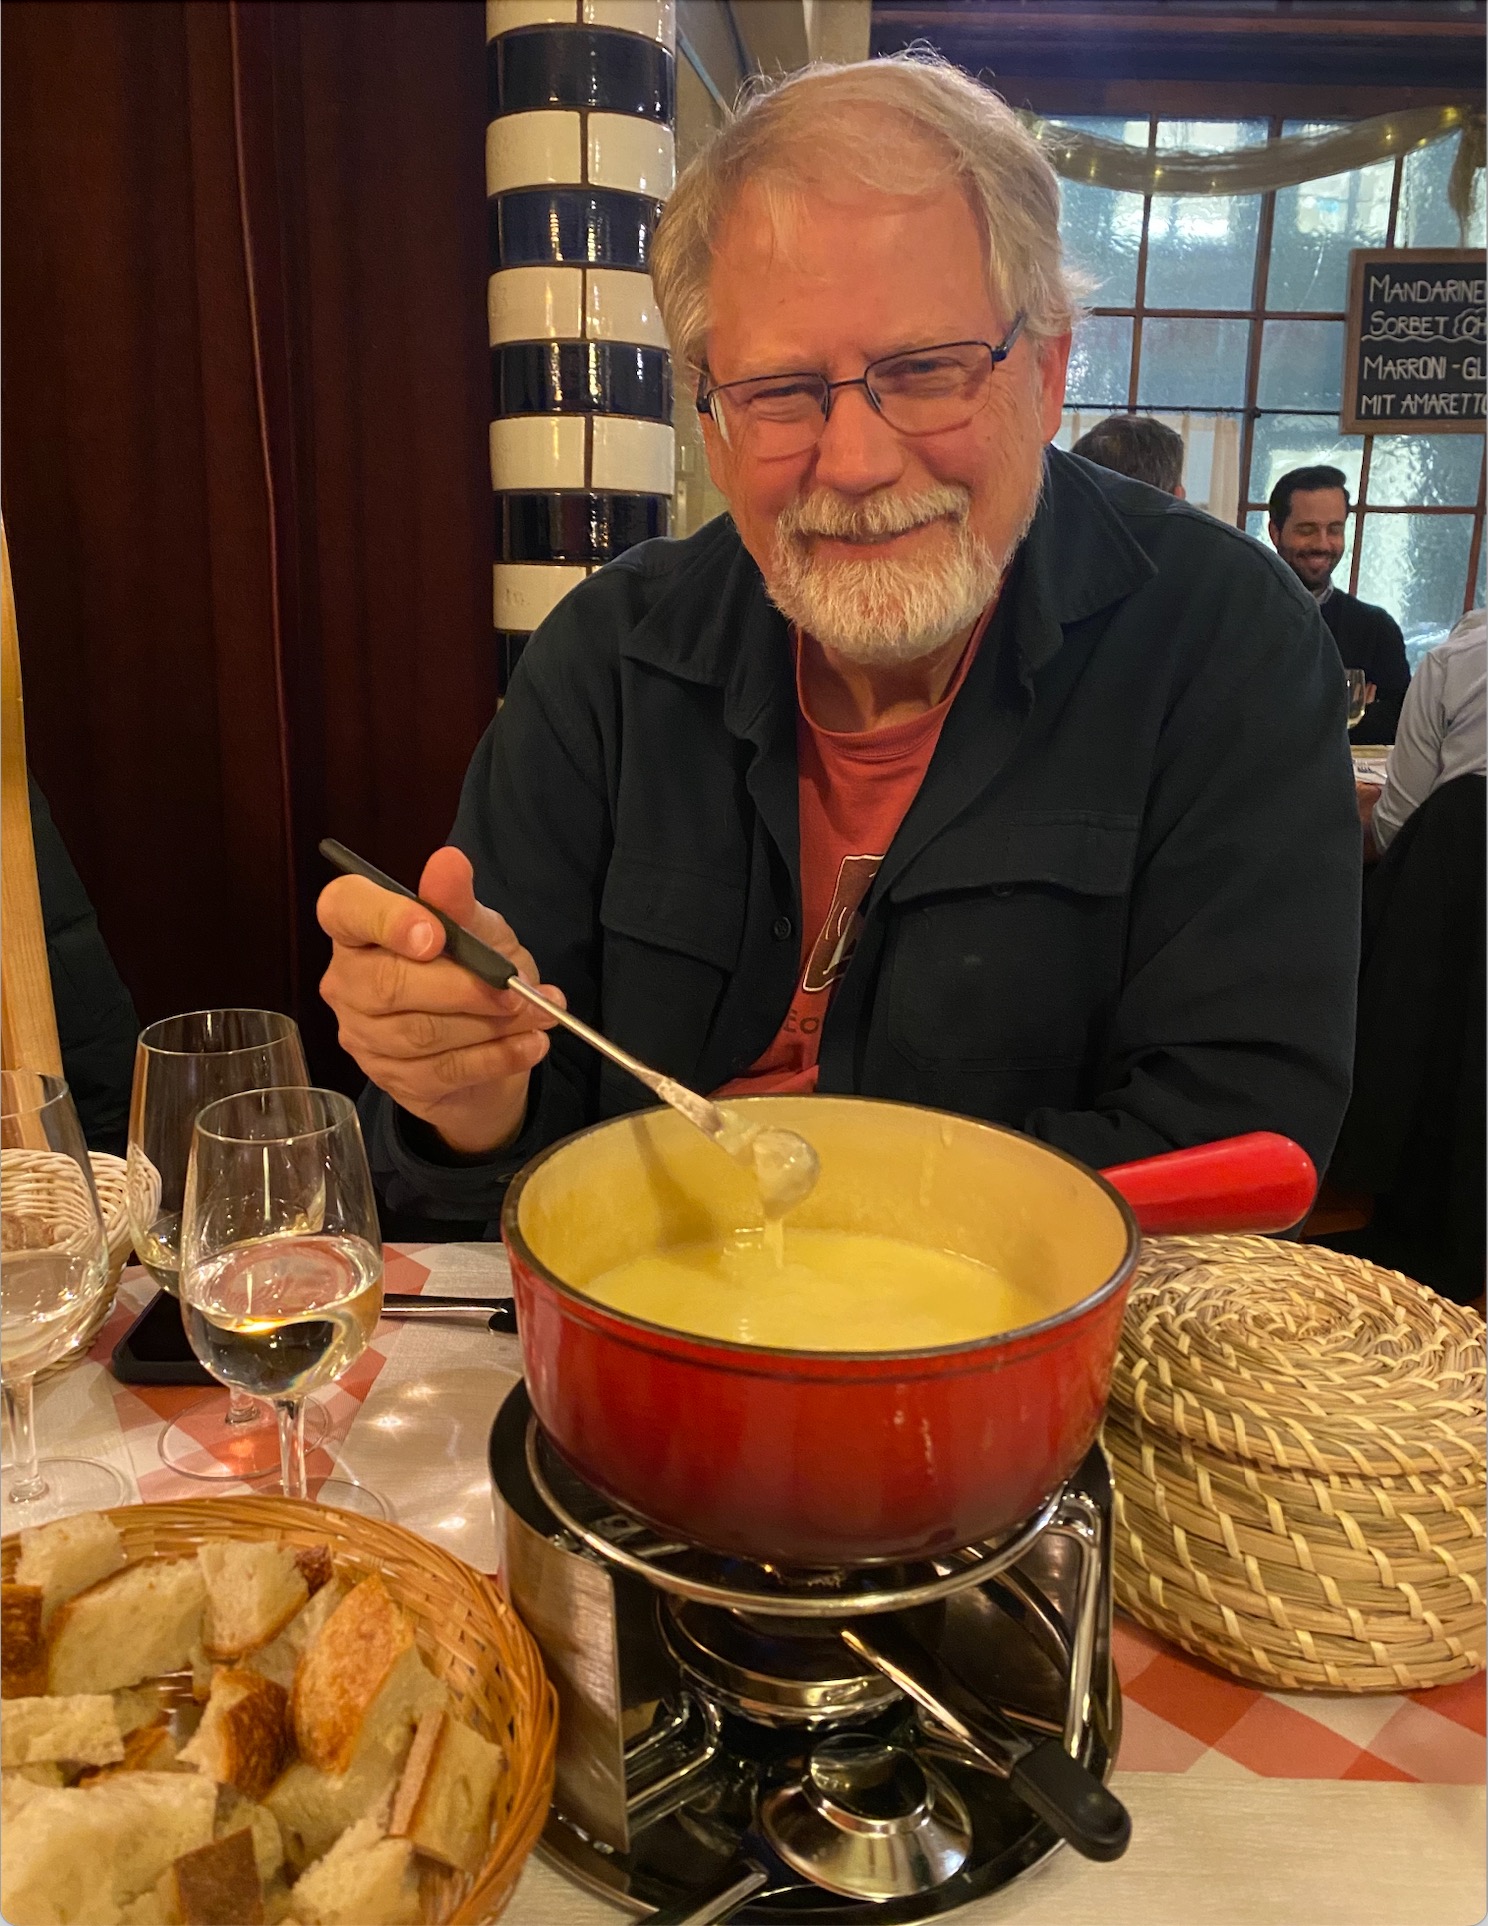 The Fon-Do's and Don'ts of Eating Fondue in Switzerland – Switzerland  Travel Tips